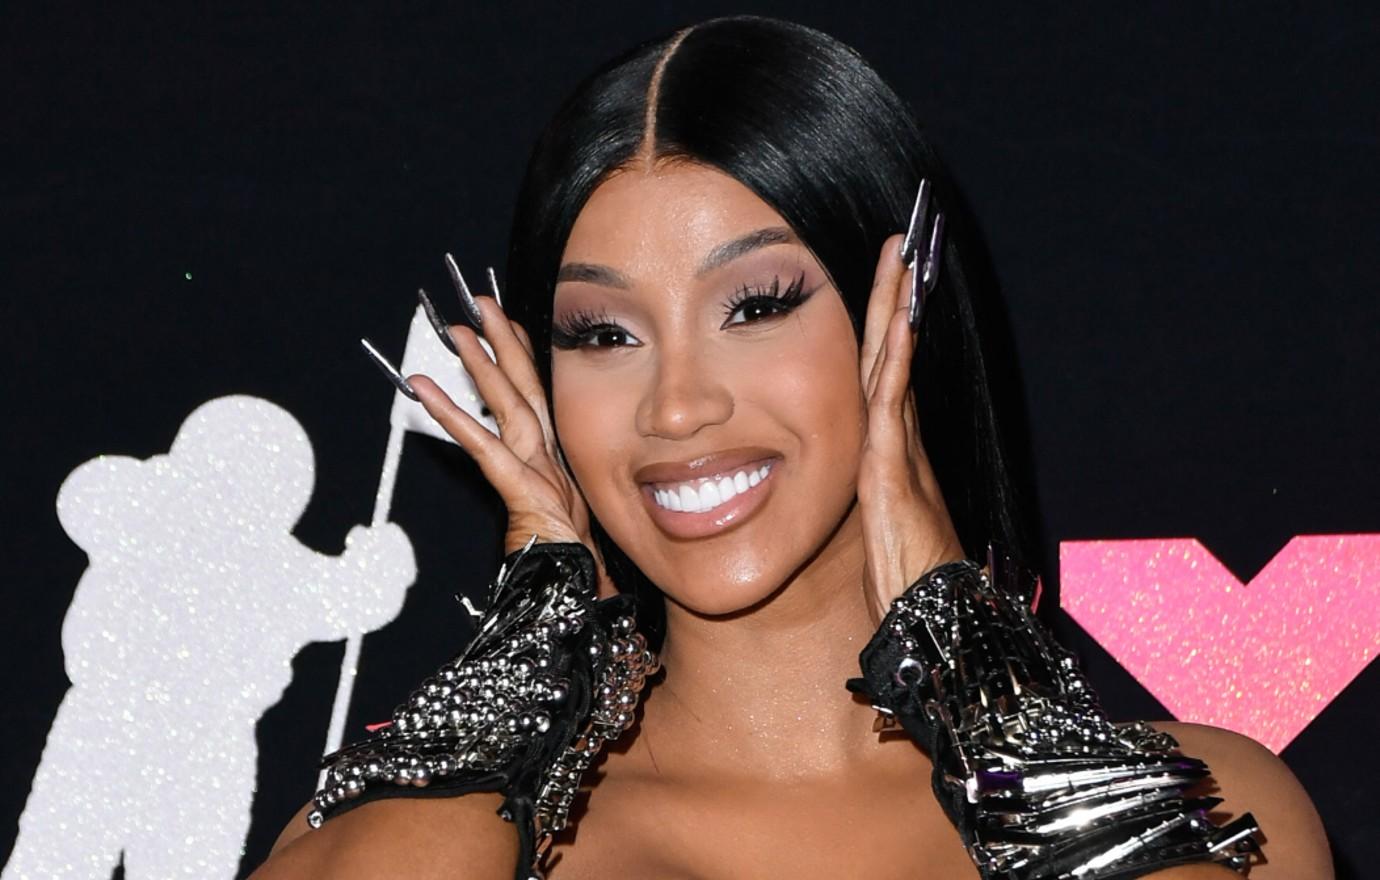 Cardi B suffers nip slip at the BET awards after party (photo)